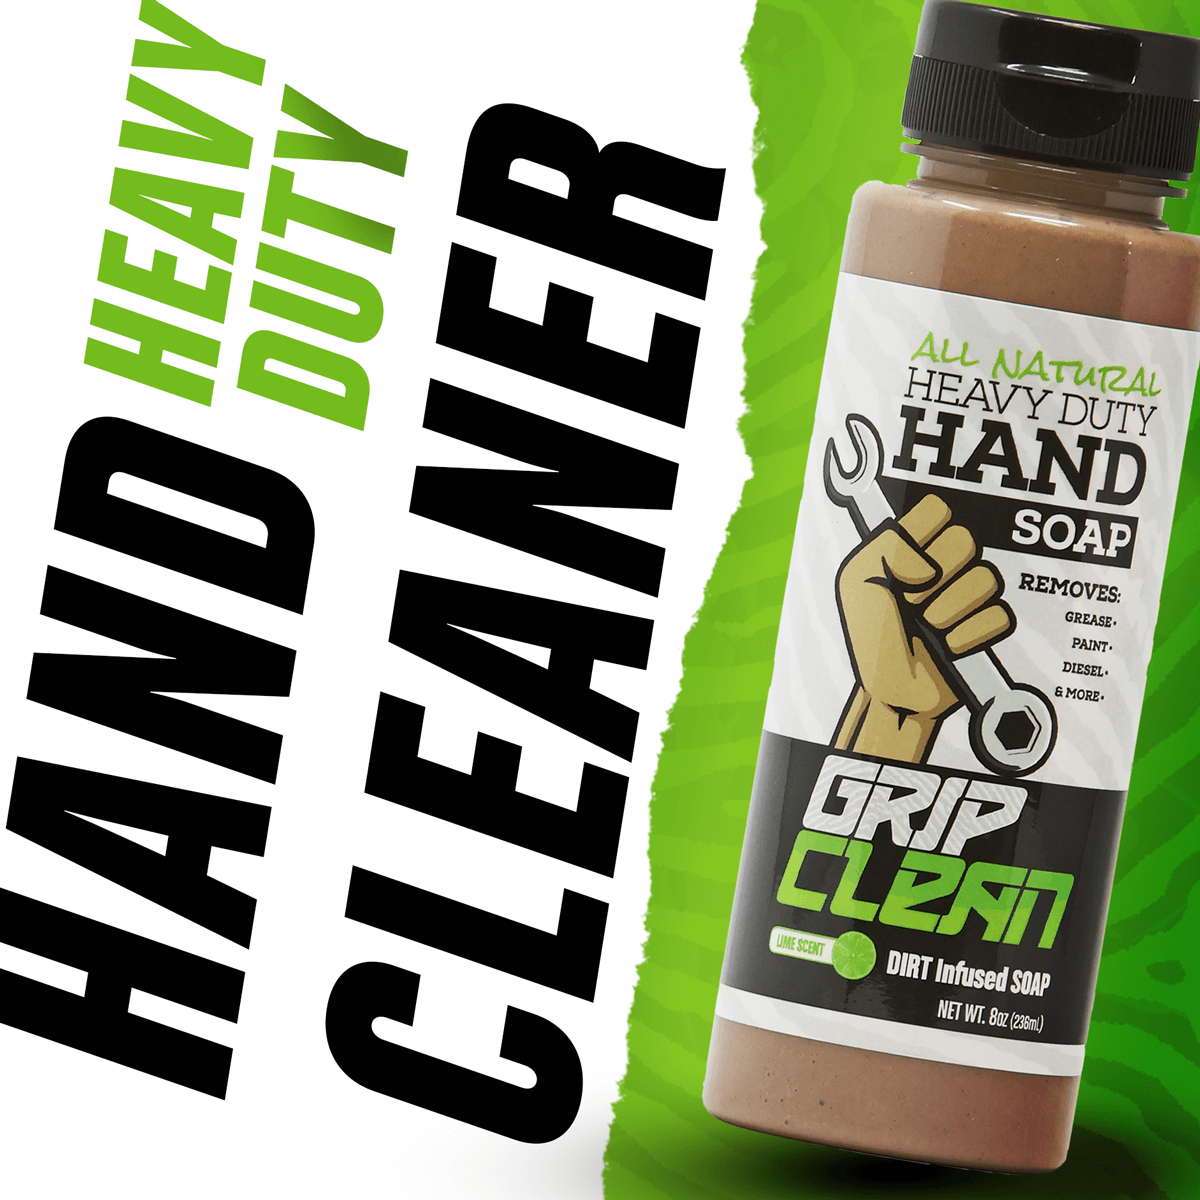  Grip Clean  Degreaser Hand Cleaner for Auto Mechanics -  Dirt-Infused Liquid Hand Soap Absorbs Grease, Oil, & Odors. Natural Heavy  Duty Pumice Soap with Moisturizing Ingredients. Lime Scented.